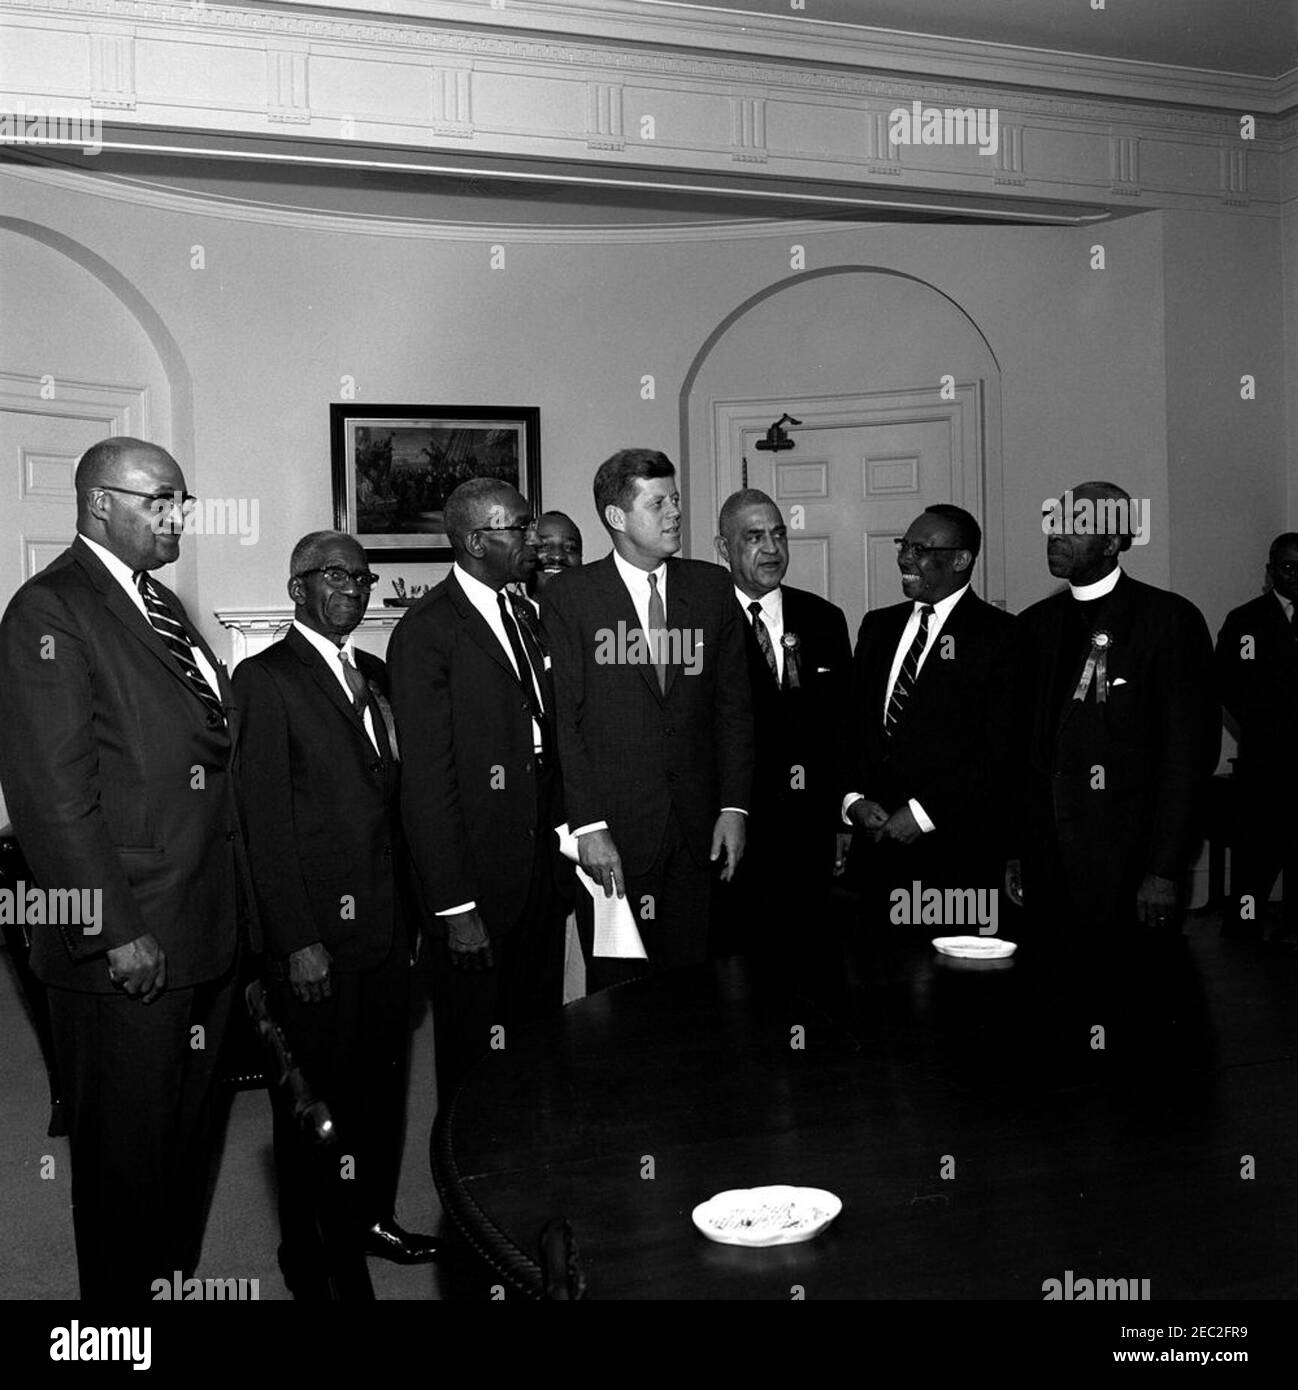 Visit of New England Baptist Missionary Convention delegates, 12:30PM. President John F. Kennedy visits with delegates of the New England Baptist Missionary Convention. Those present include: President of the Convention and Pastor of Wayland Temple Baptist Church in Philadelphia, Pennsylvania, Reverend Dr. Clarence M. Smith; Chairman of the Convention and Associate Pastor of Abyssinian Baptist Church in New York City, Reverend Dr. David N. Licorish; Pastor of Third Baptist Church in Springfield, Massachusetts, Reverend Dr. Paul A. Fullilove; A. A. Lewis; J. Leonard Morgan. Fish Room, White Hou Stock Photo